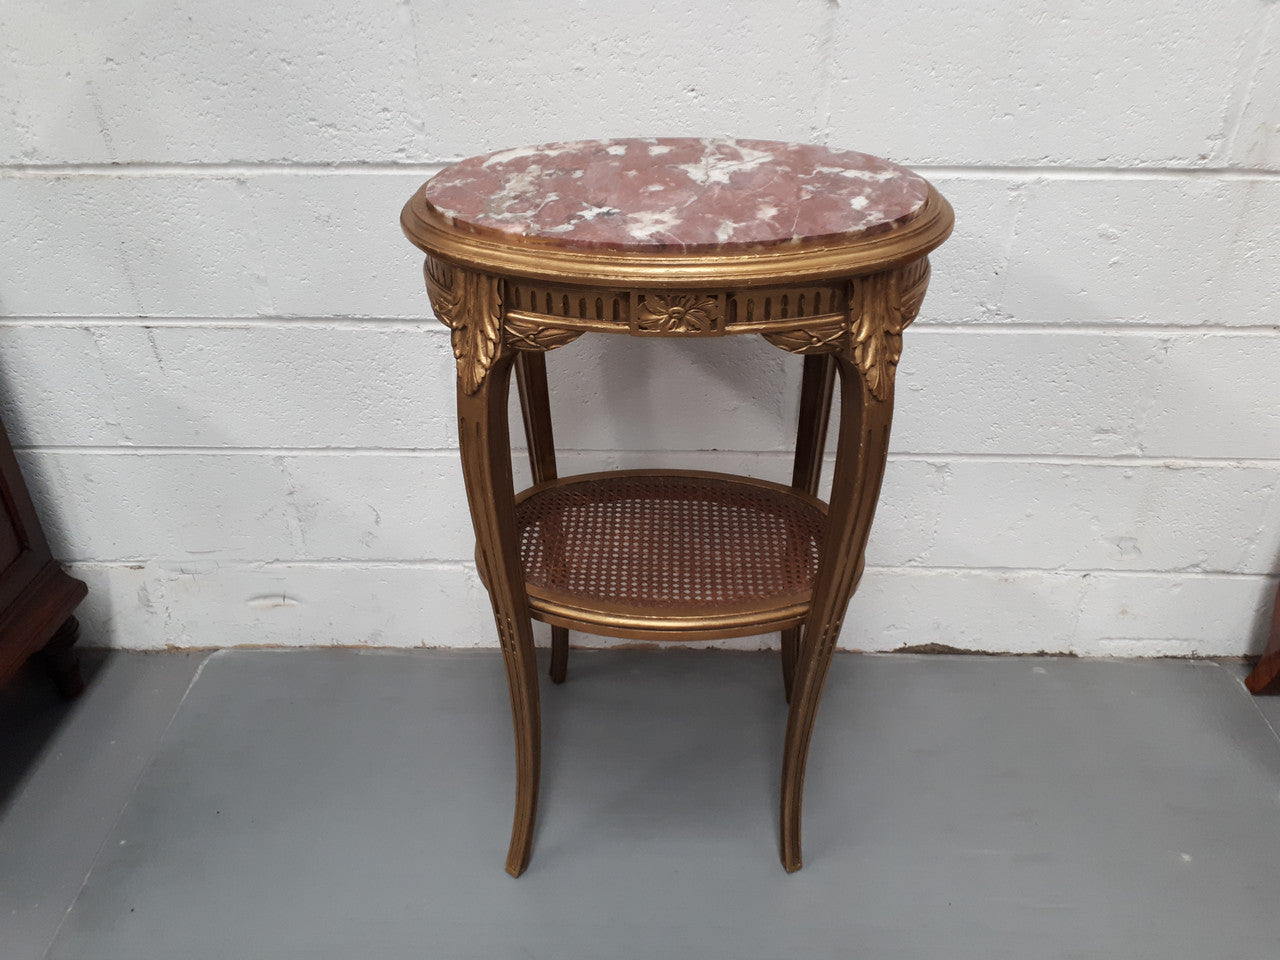 An exceptional & rare 18th century Louis XVI oval inset marble top & giltwood side table with original water gilding. In good restored condition. Circa 1790.